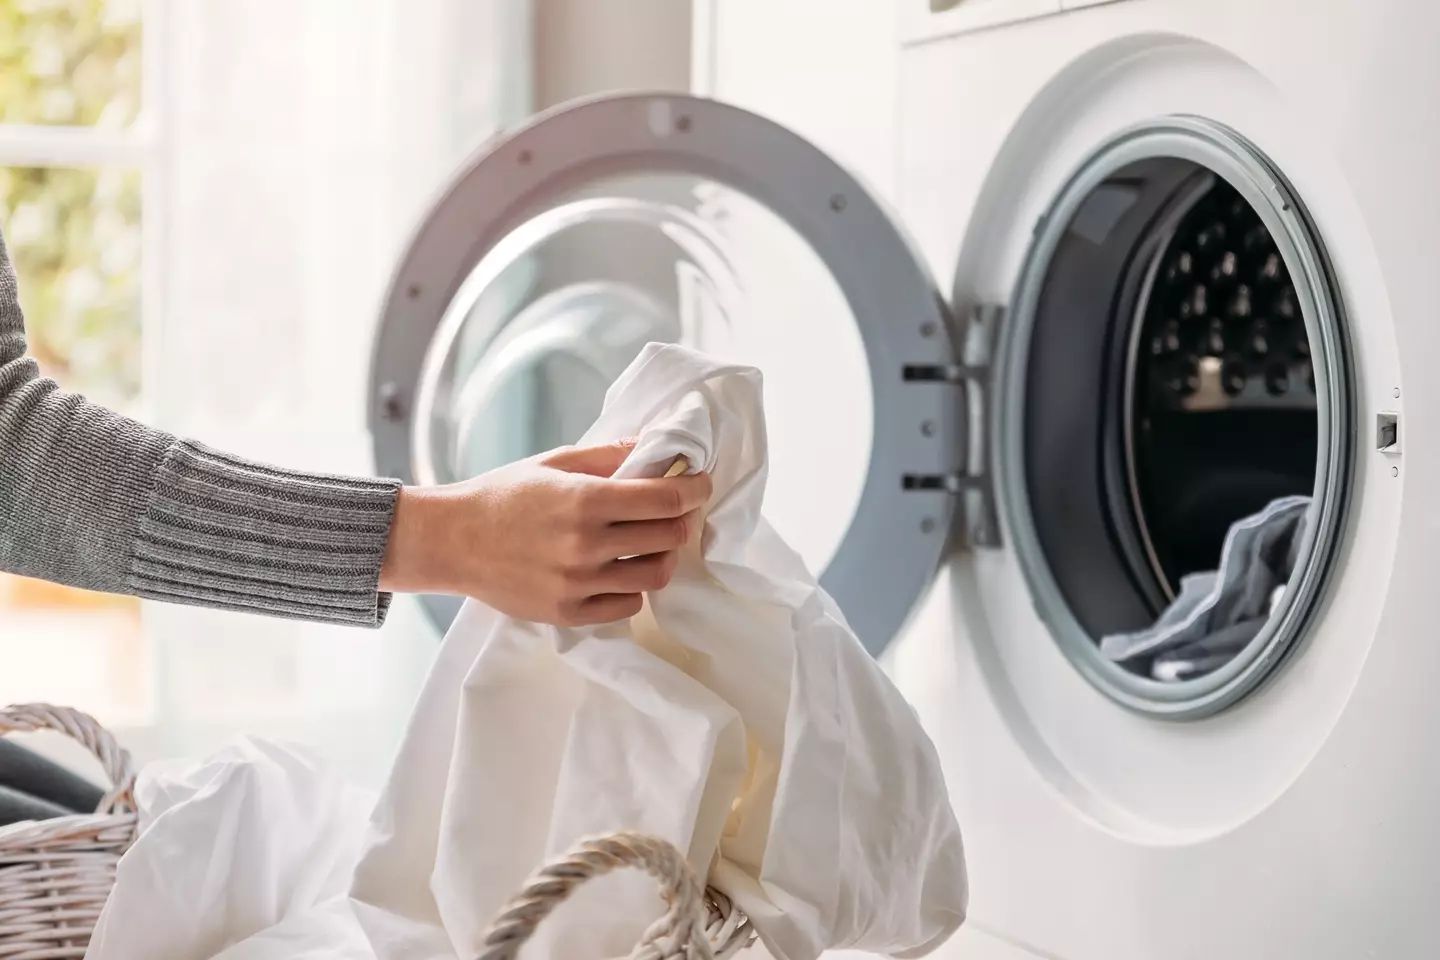 If you change the time that you wash your clothes, you could reap the rewards. (Getty Stock Image)